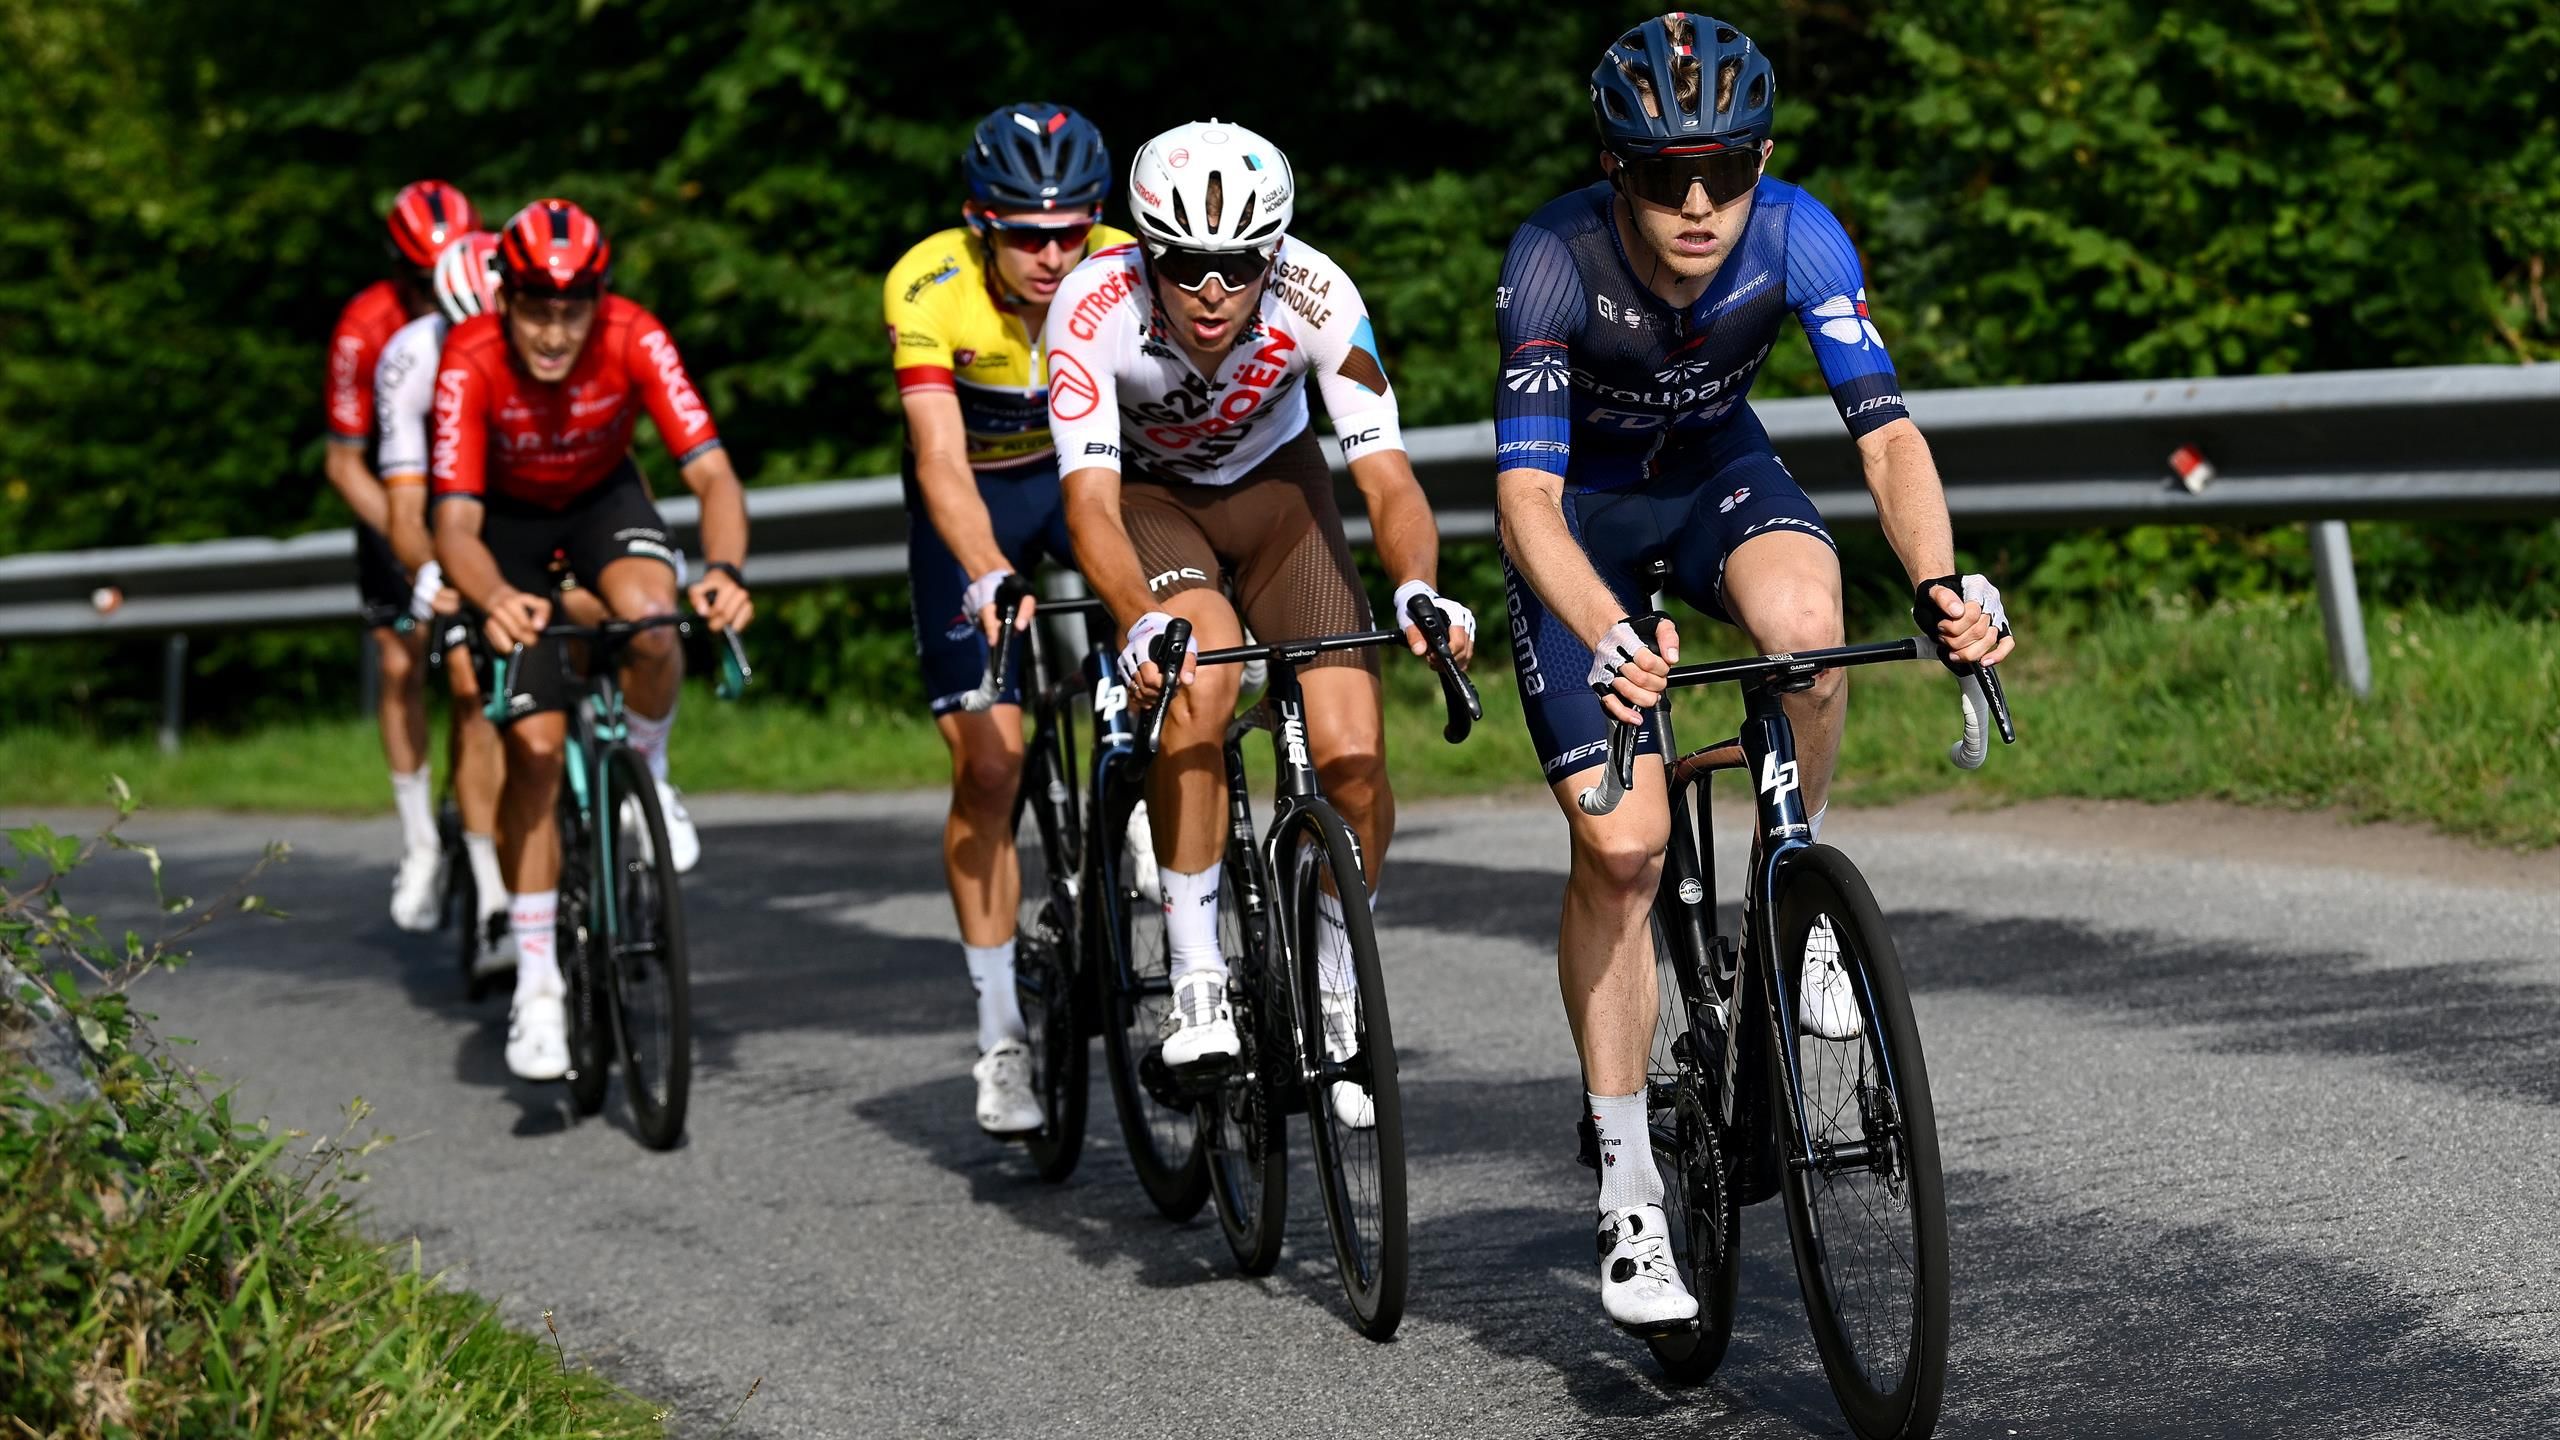 Romain Gregoire wins Stage 3 of Tour du Limousin-Perigord to extend race lead - Cycling video